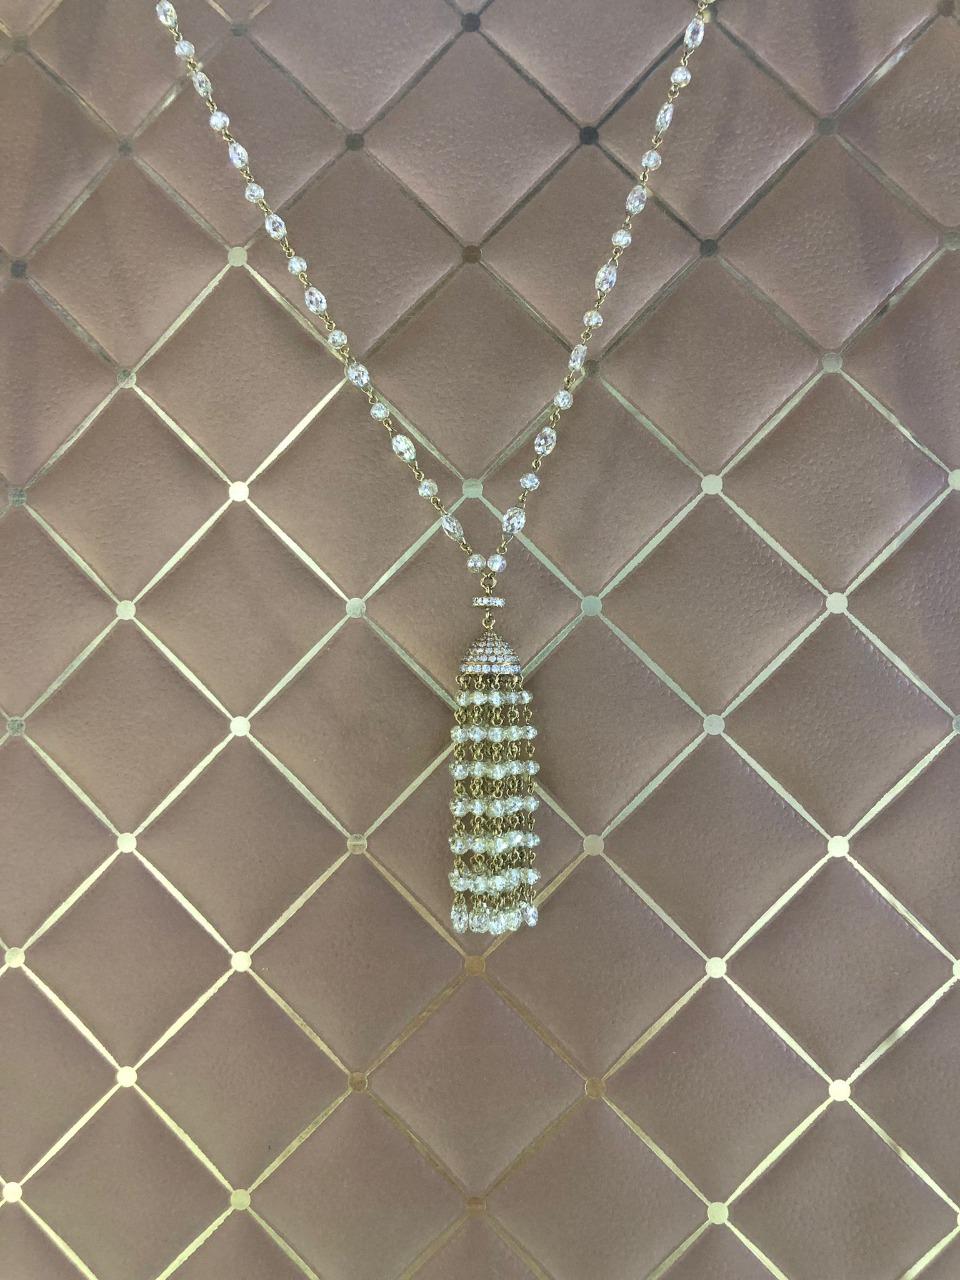 PANIM 36.46Ct Diamond Briolette & Beads Tassel Necklace in 18 Karat Yellow Gold In New Condition For Sale In Tsim Sha Tsui, Hong Kong